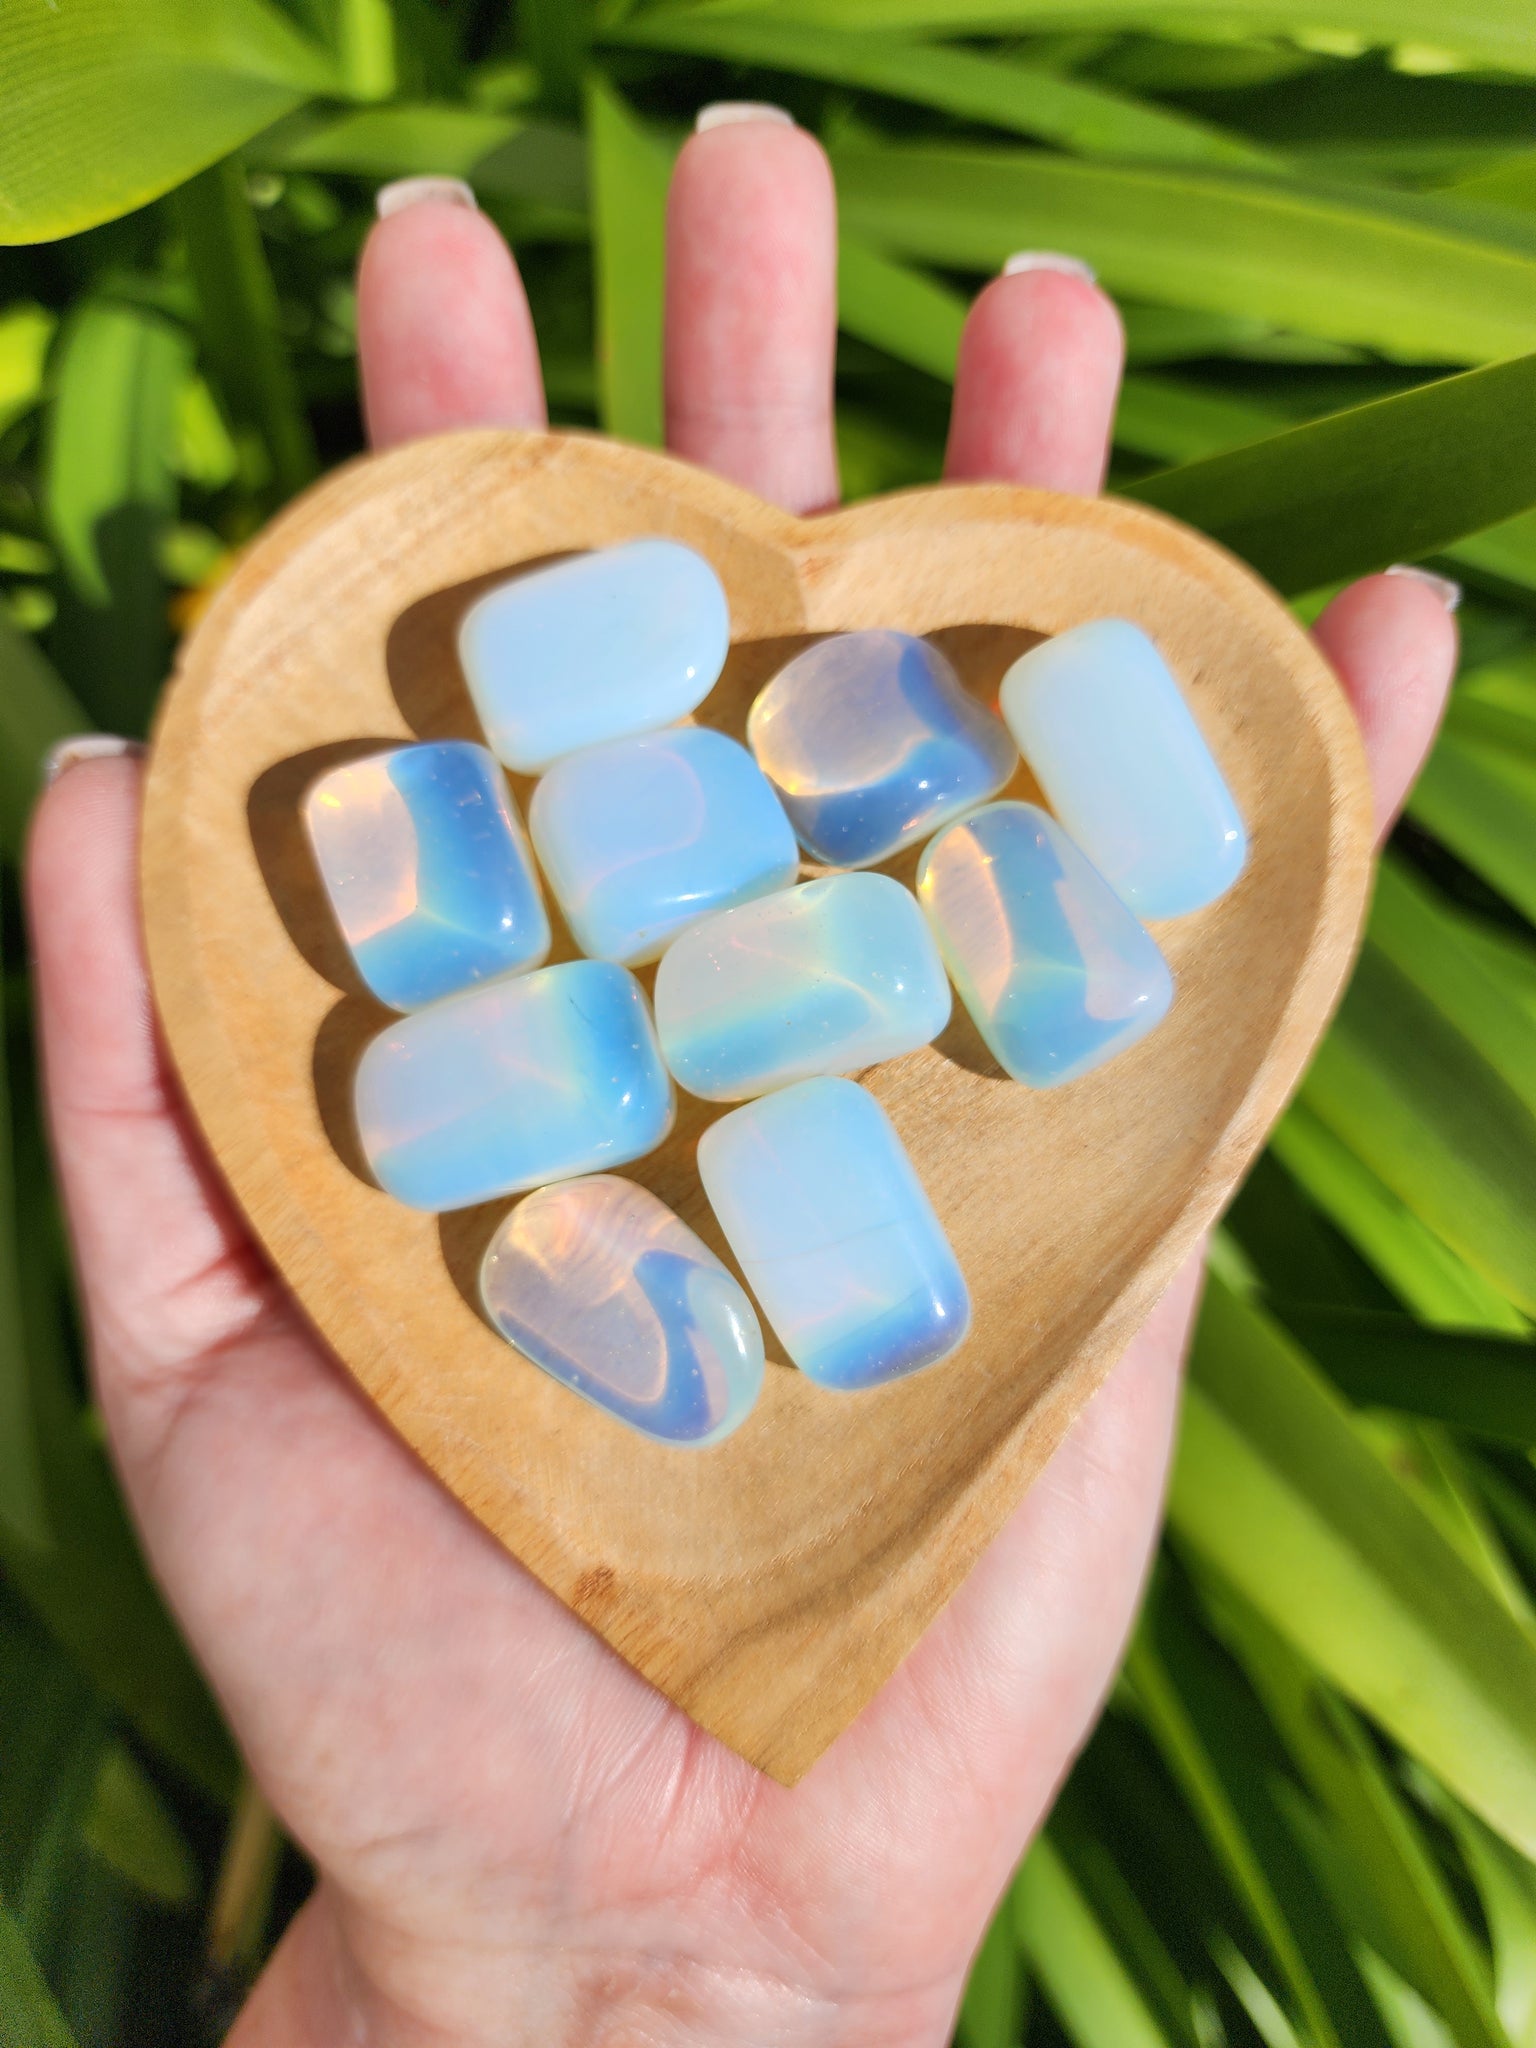 Opalite Tumbled Stones 10 Pack $20 Valued at $30